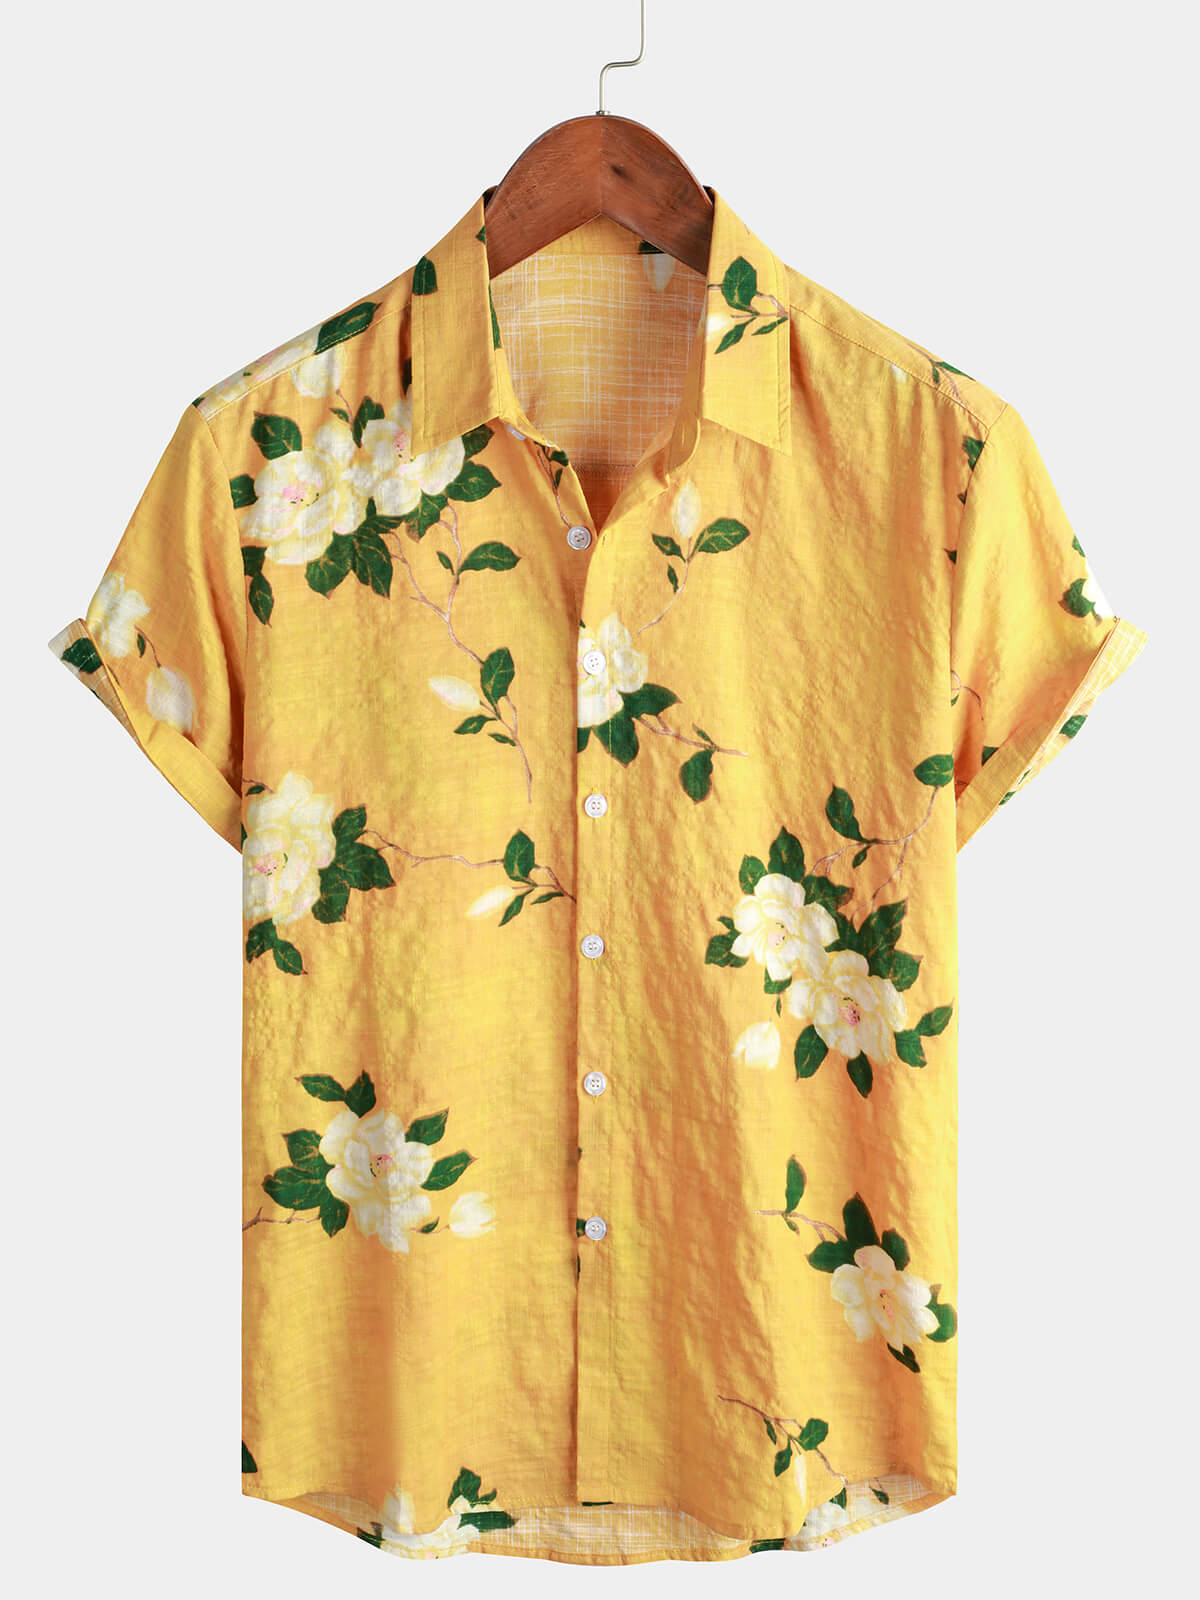 Men's Yellow Vintage Floral Cotton Hawaiian Breathable Short Sleeve Button Up Shirt